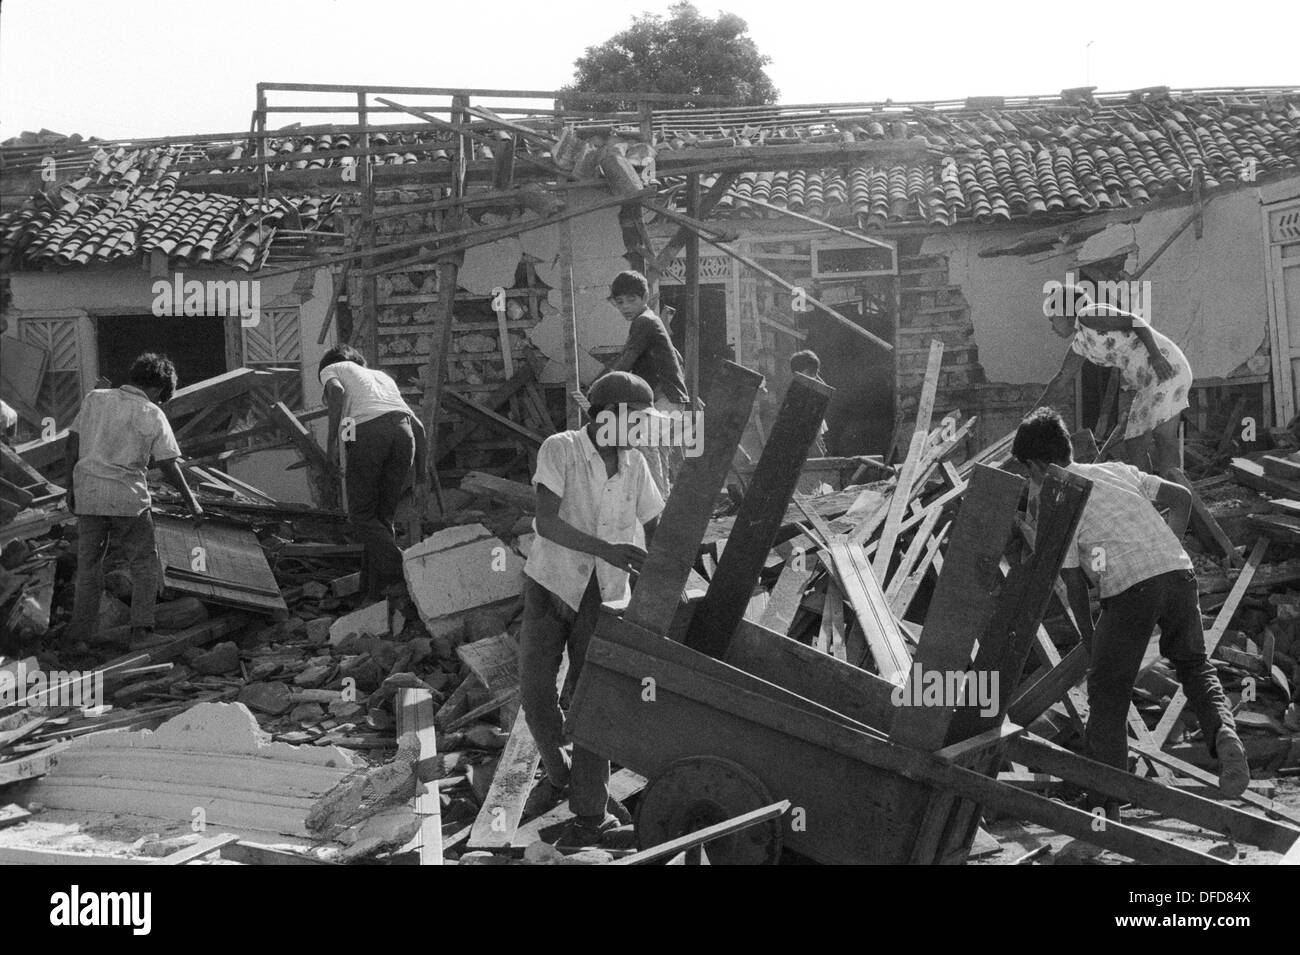 Earthquake damage Managua Nicaragua 1972. Sorting through remains of shops and homes after an earthquake. 1970s HOMER SYKES Stock Photo